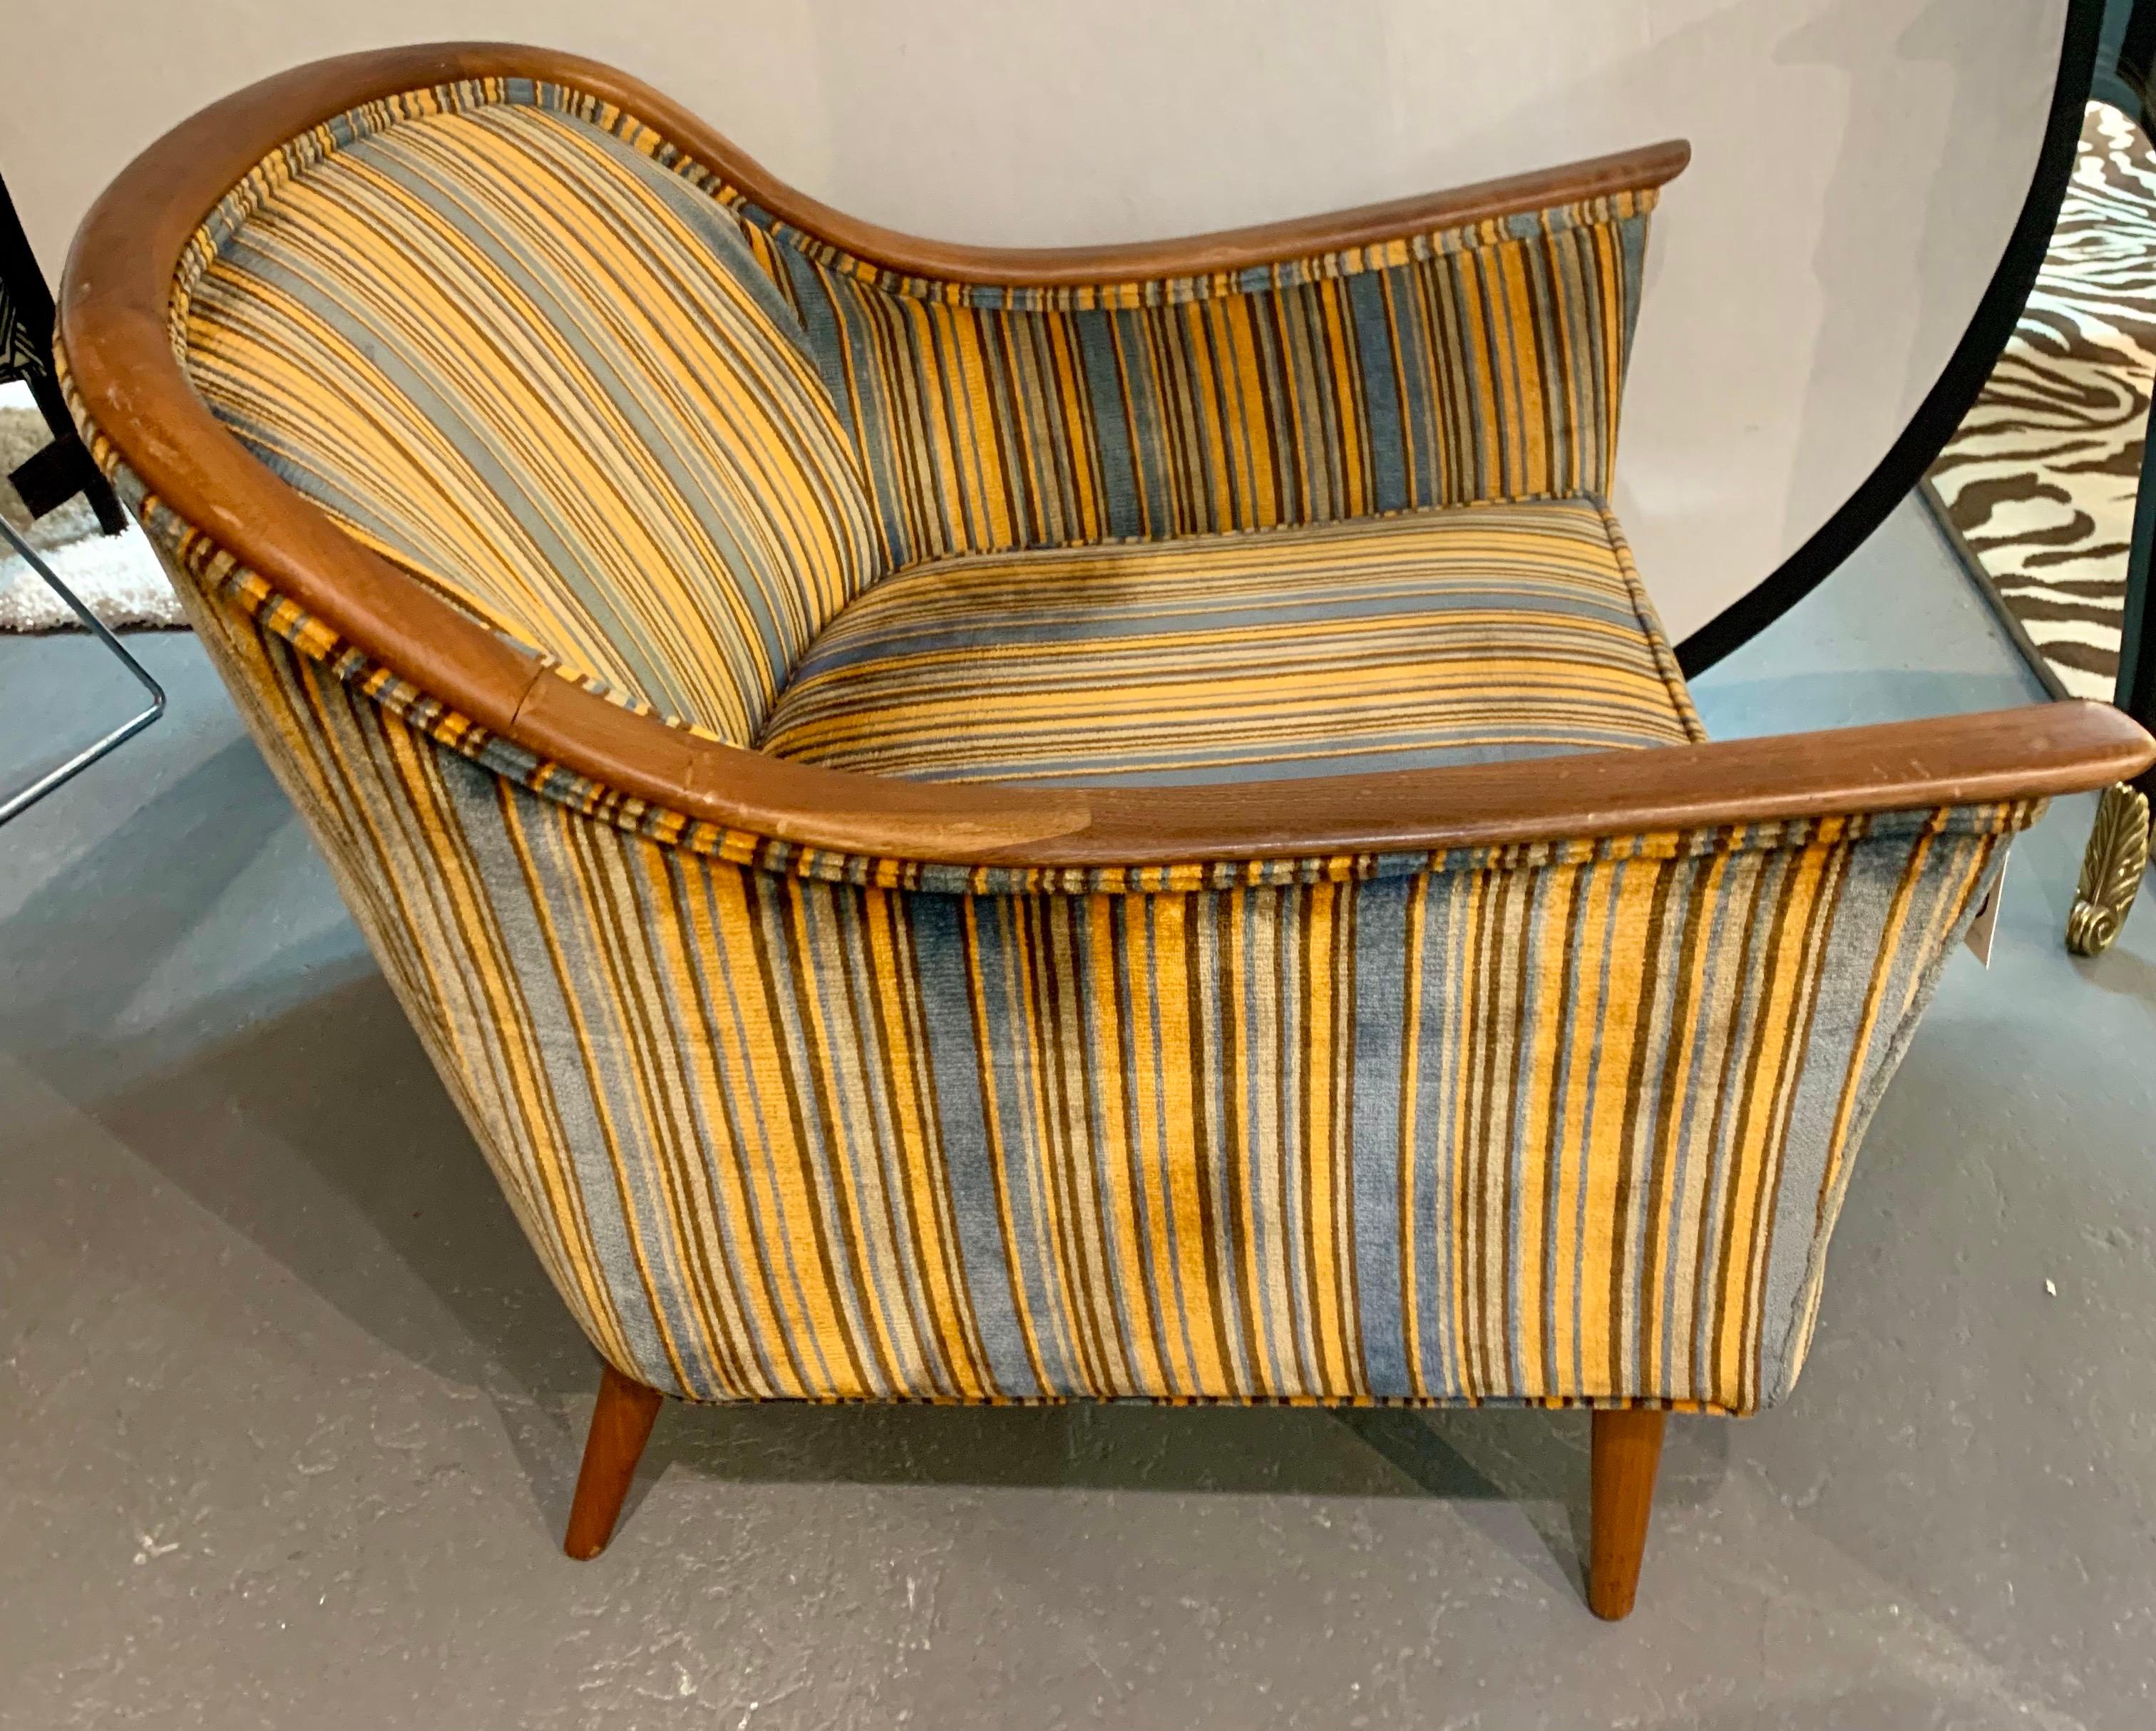 Iconic Mid-Century Modern lounge chair with original Jack Lenor Larsen fabric which feels like velvet. Bold stripes and color scheme. Wood appears to be walnut or fruitwood. Will make any room look elegant. Own the best.